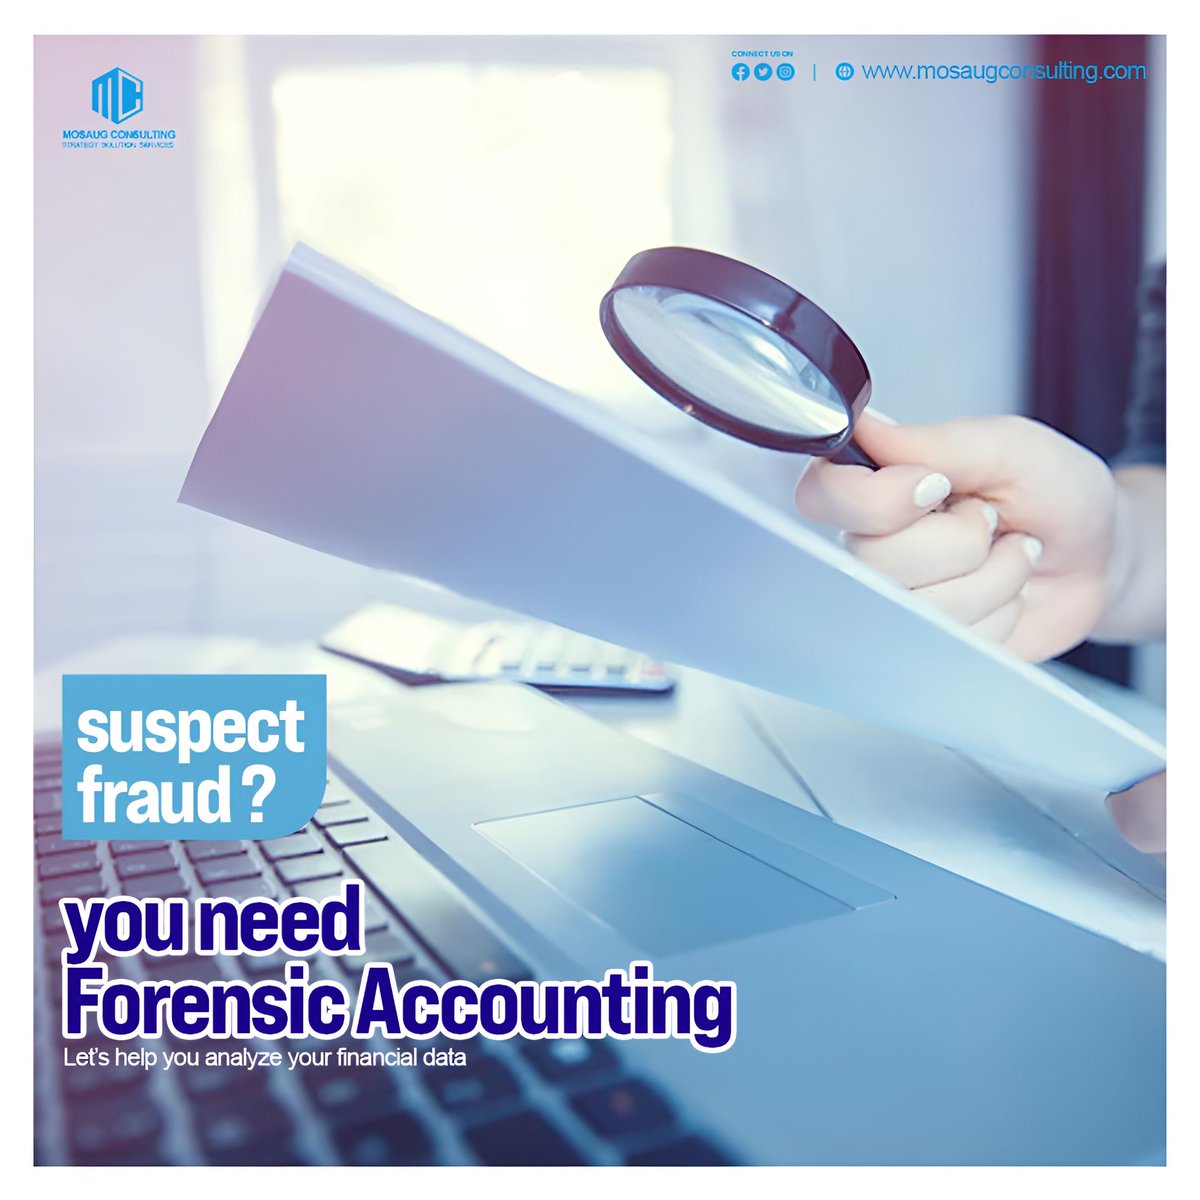 Discover the truth behind your numbers with our Forensic Accounting services. We dig deep, finding clarity in numbers to protect your financial truth. Trust us for accurate insights. #ForensicAccounting #FinancialClarity